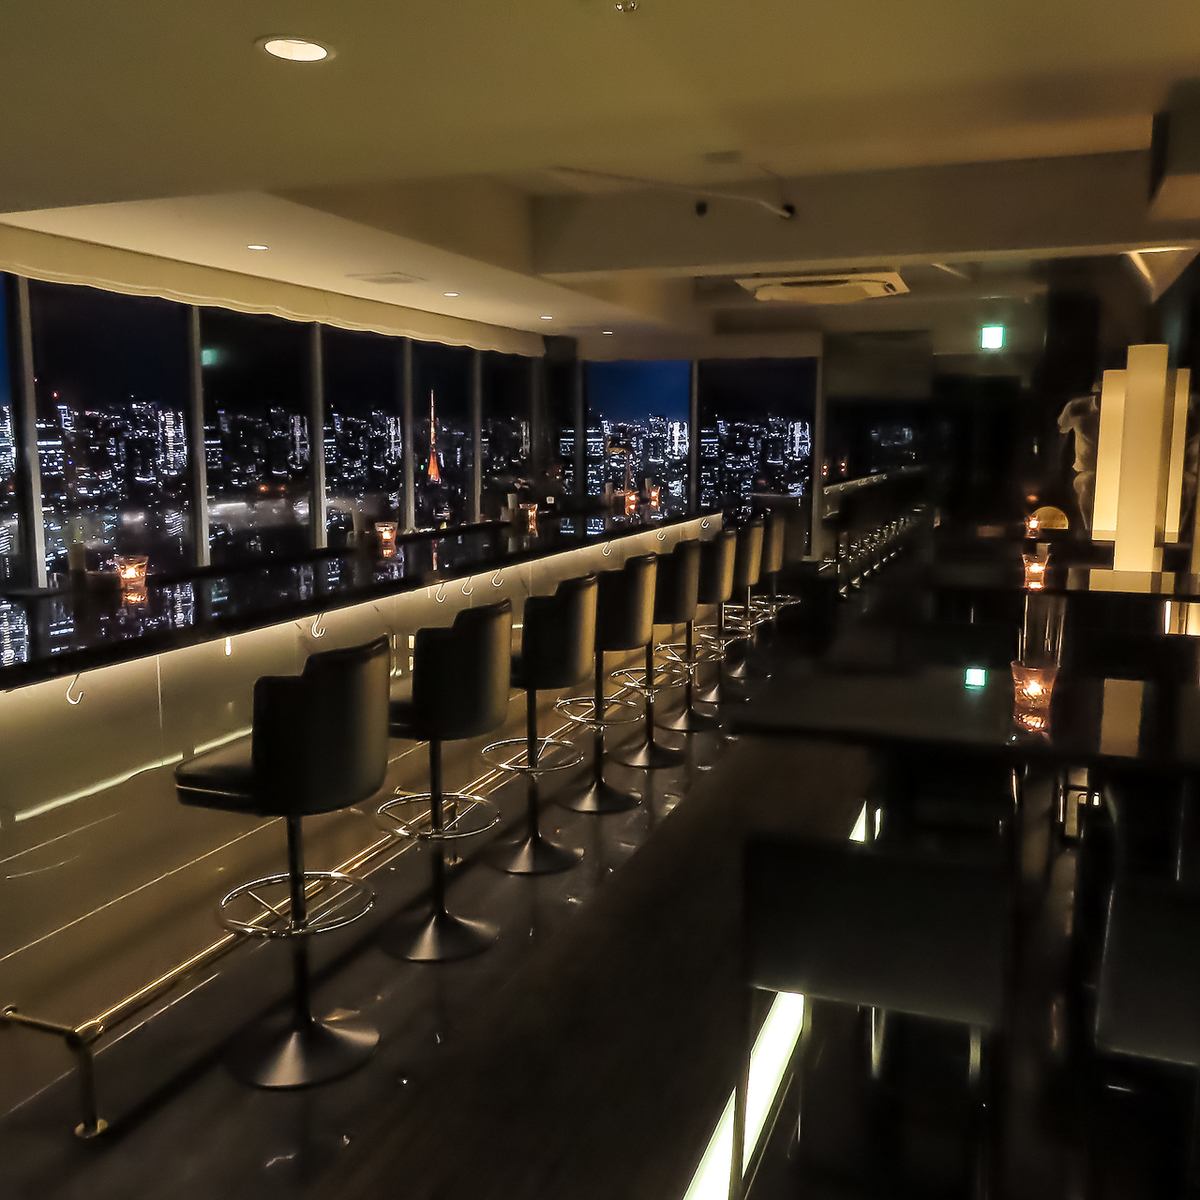 An authentic bar where you can spend time in a space inspired by the night view has appeared in Kinshicho!